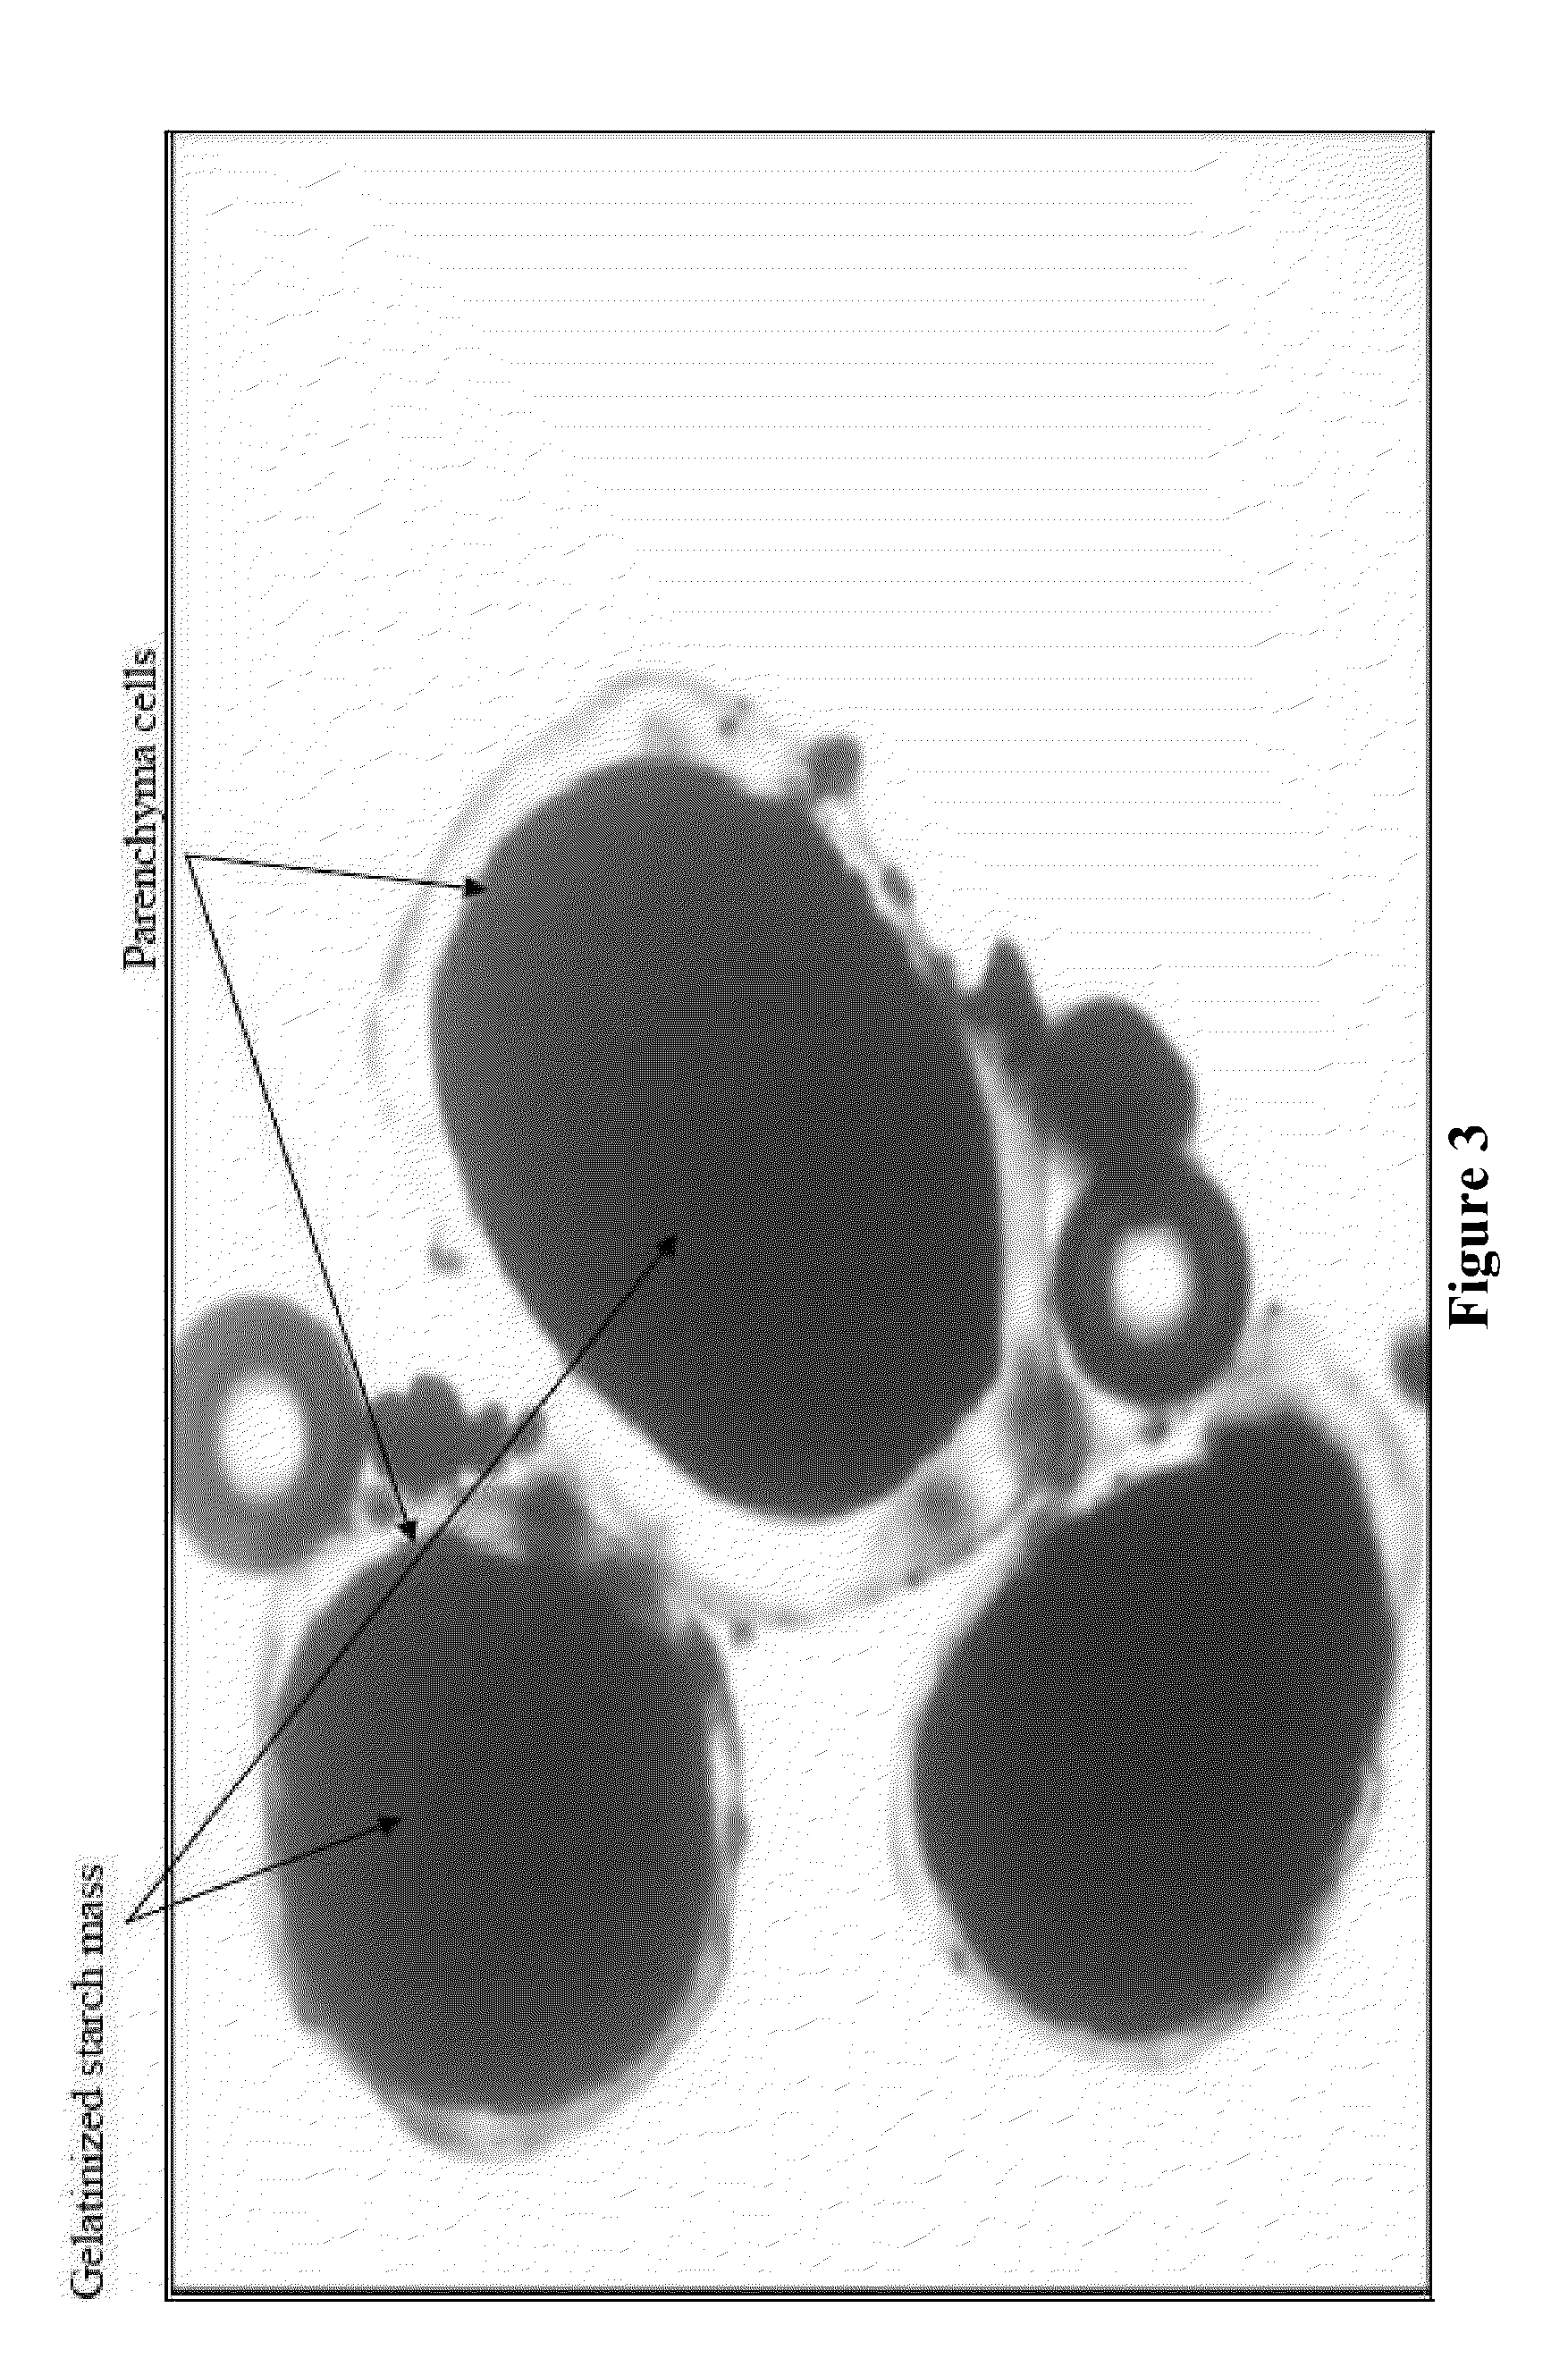 Potato products with enhanced resistant starch content and moderated glycemic response and methods thereof